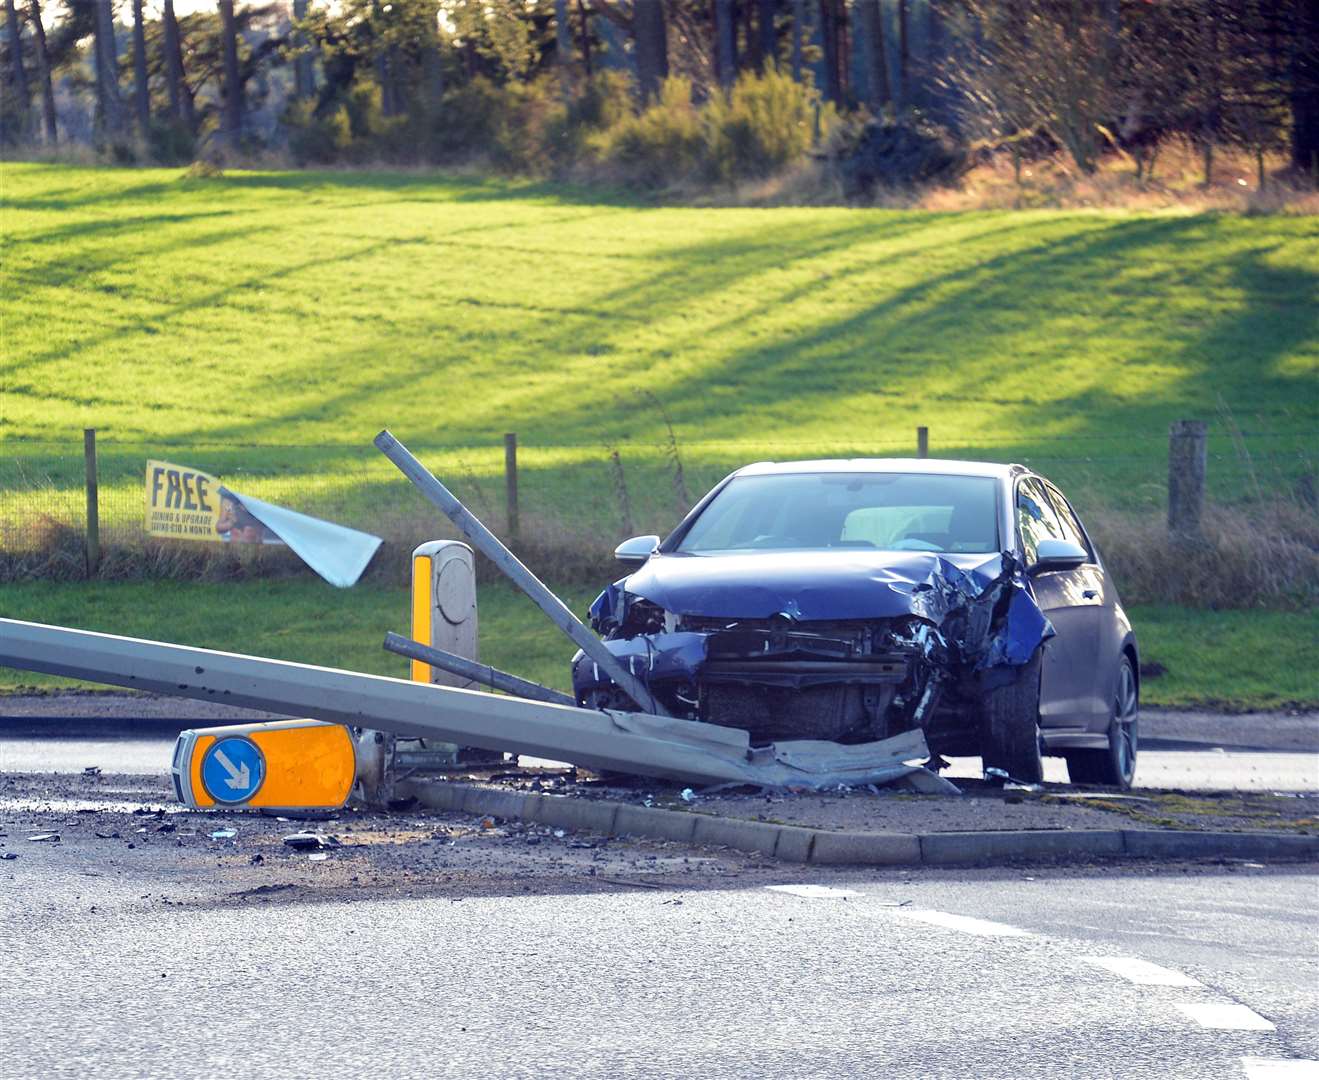 The aftermath of the RTC at Tornagrain on the A96.